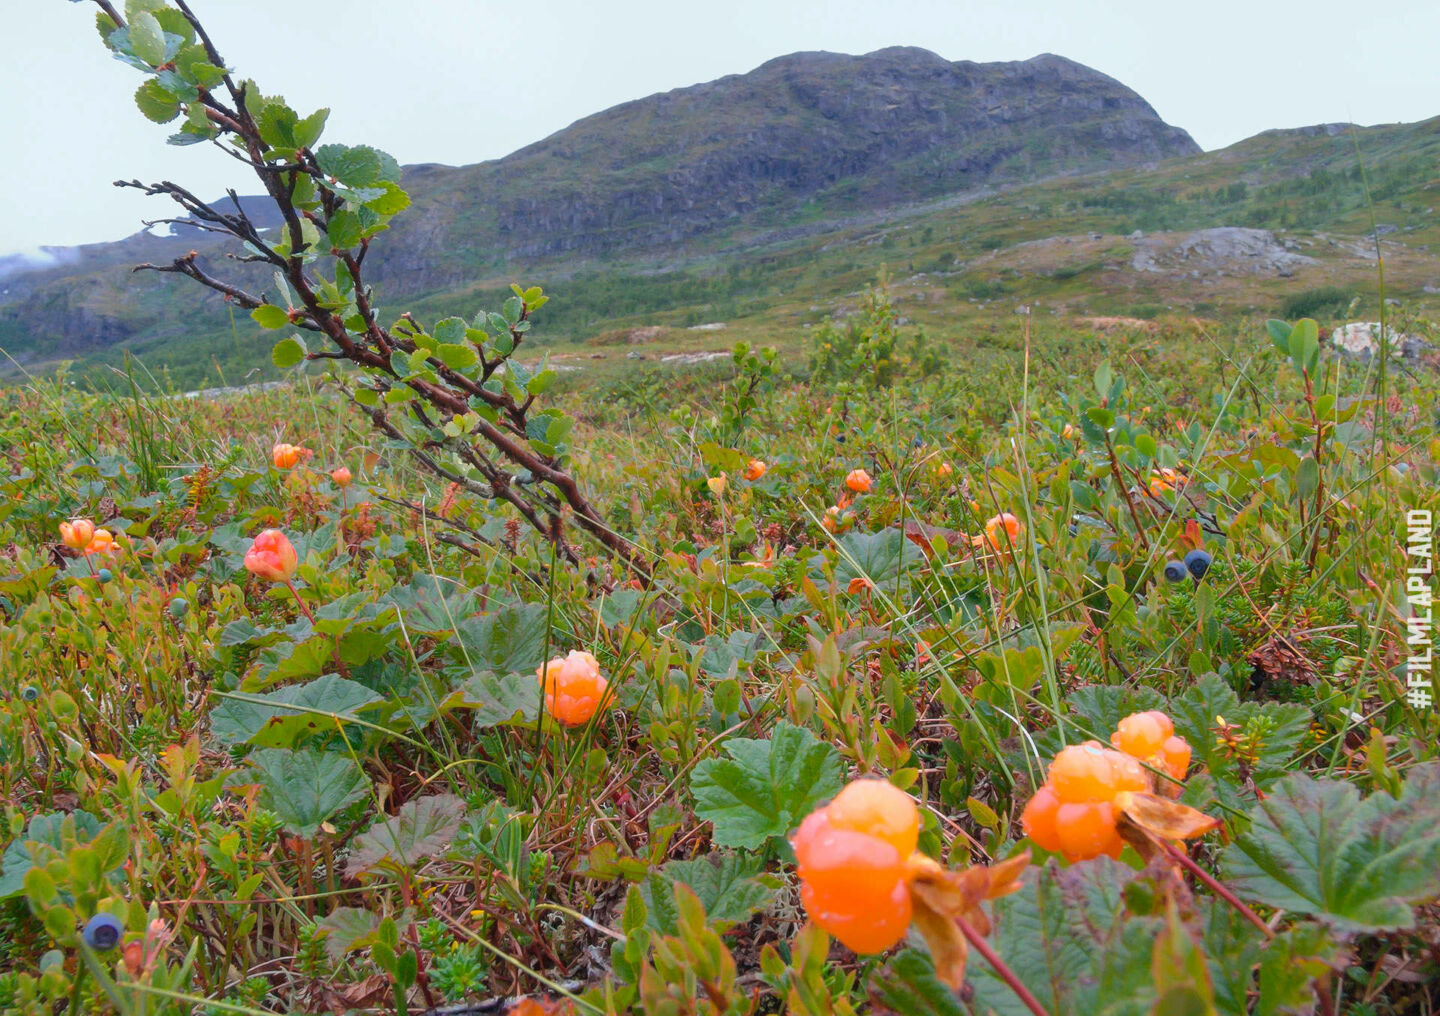 Picking berries are an important part of northern culture, a feature of filming locations in Finnish Lapland